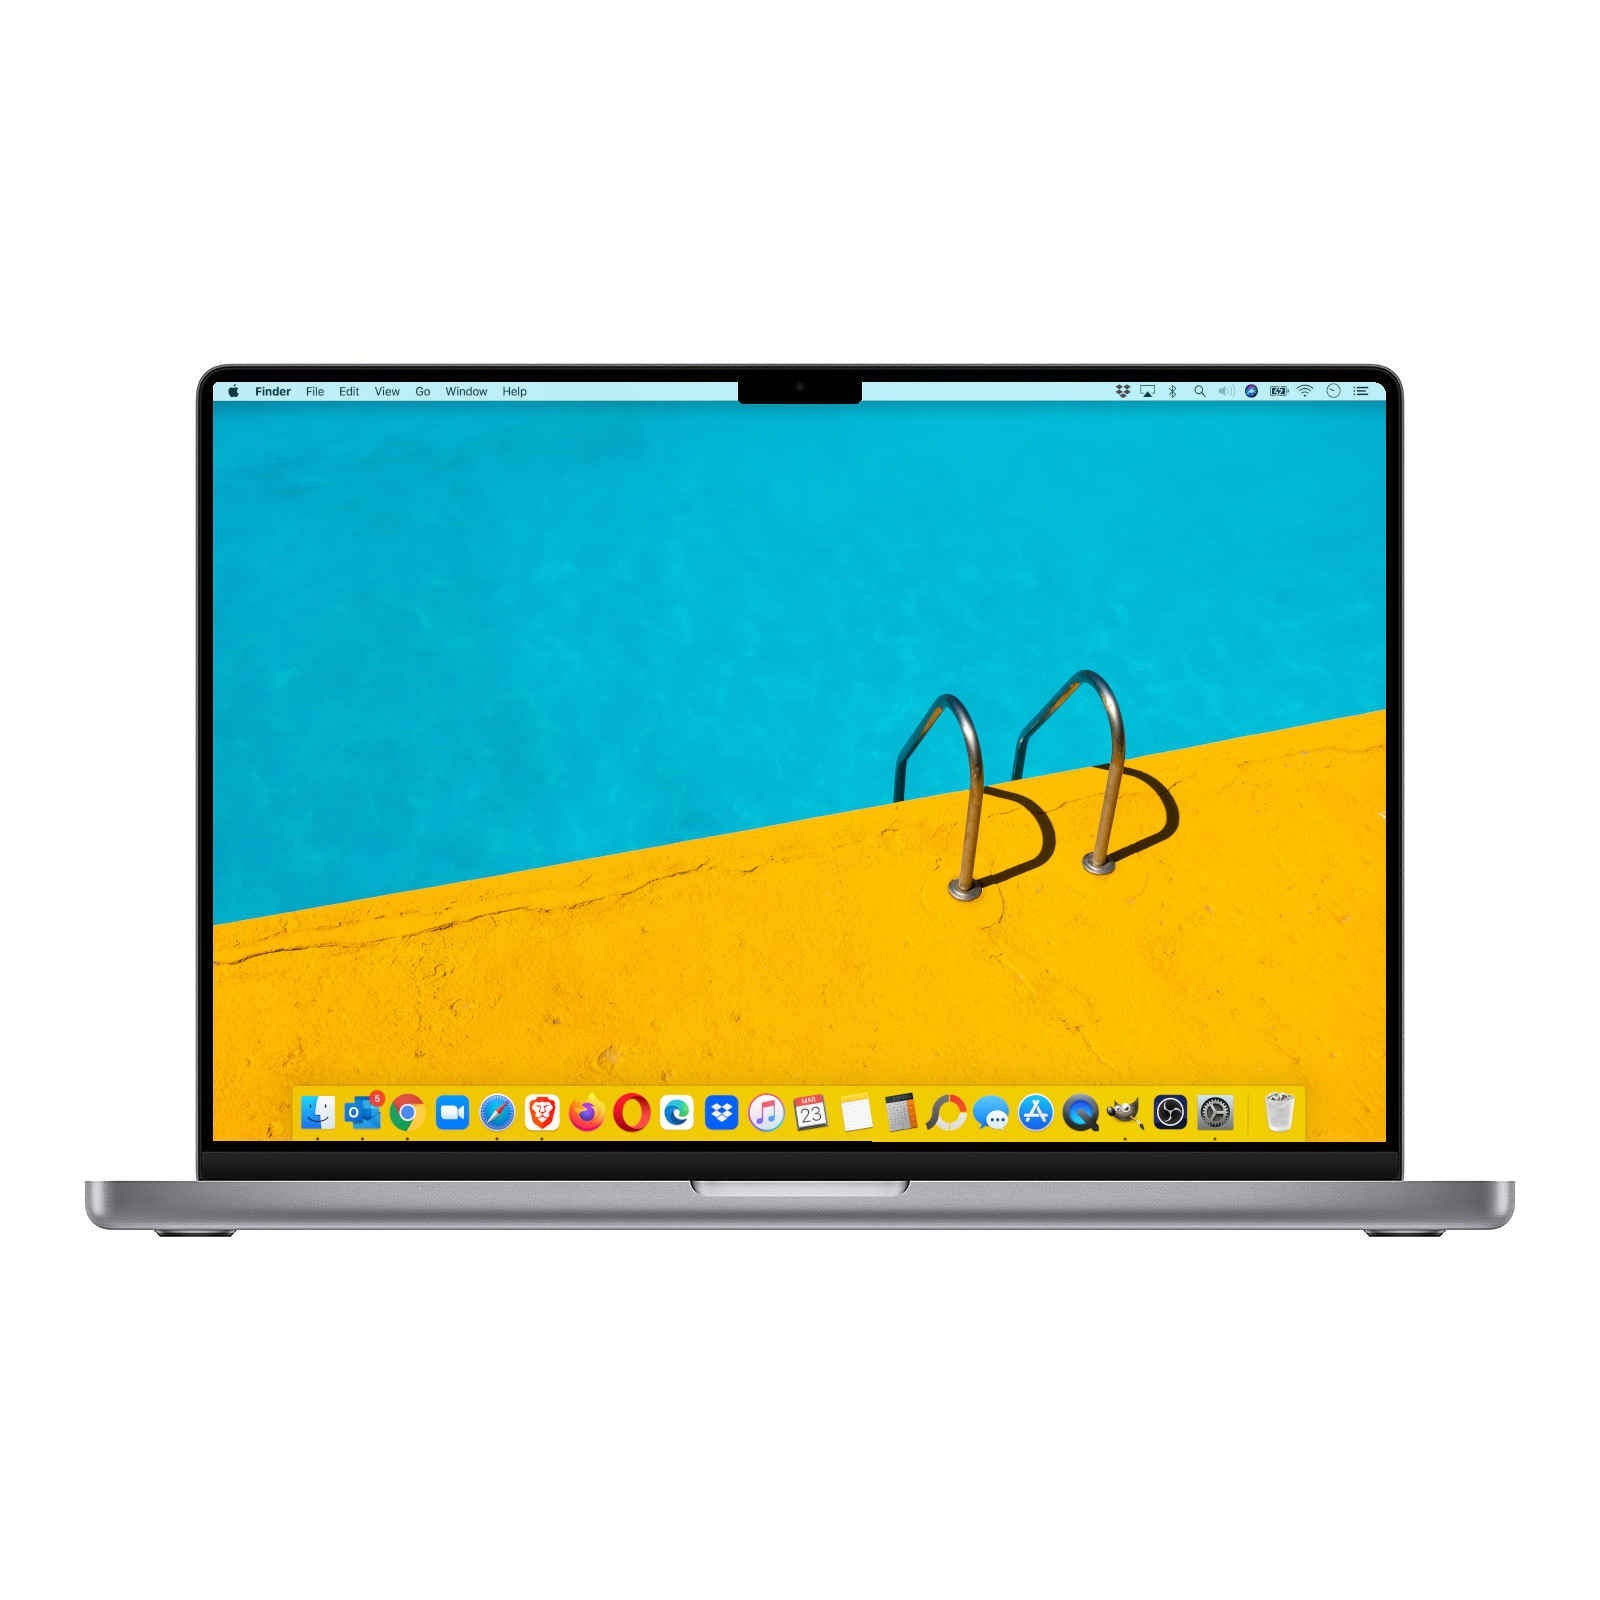  Apple 2021 MacBook Pro (16-inch, M1 Pro chip with 10